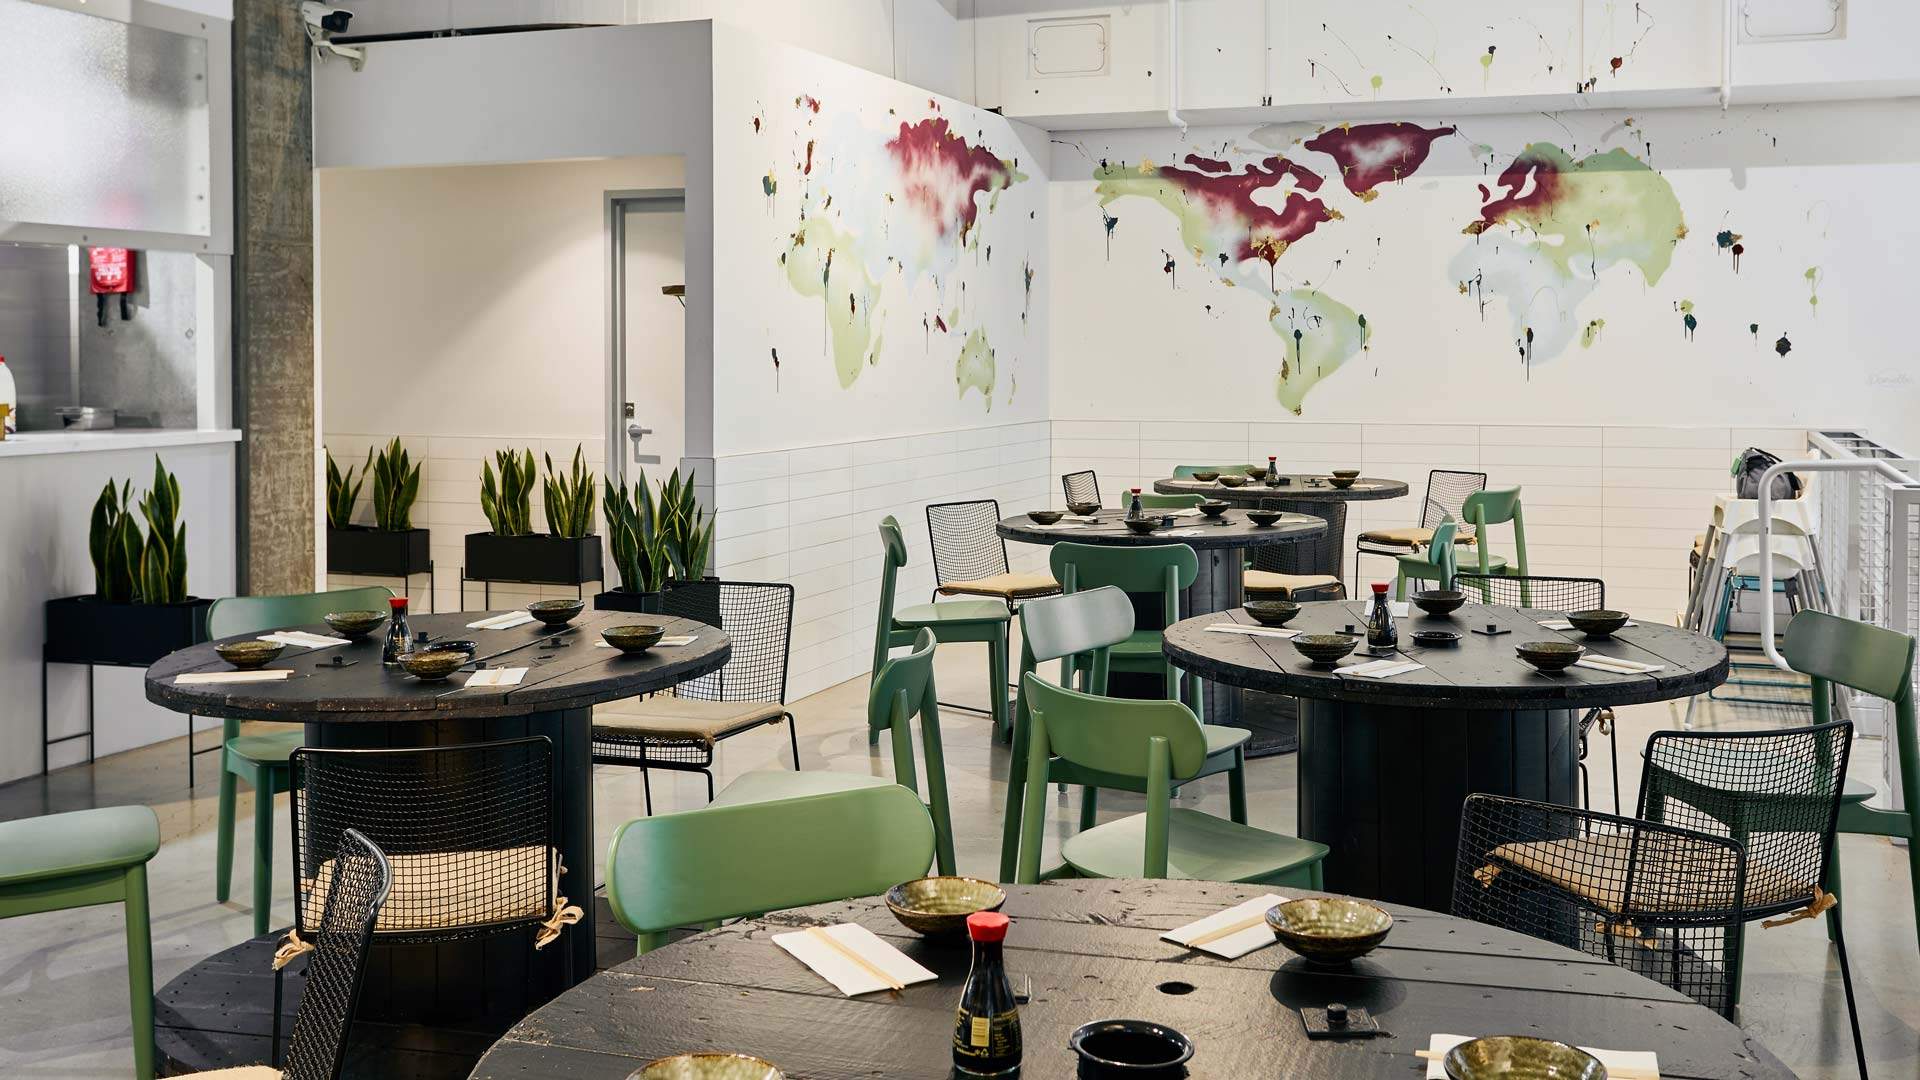 Grand Lafayette Is Prahran's New All-Day Eatery Serving Up $33 All-You-Can-Eat Japanese Feasts